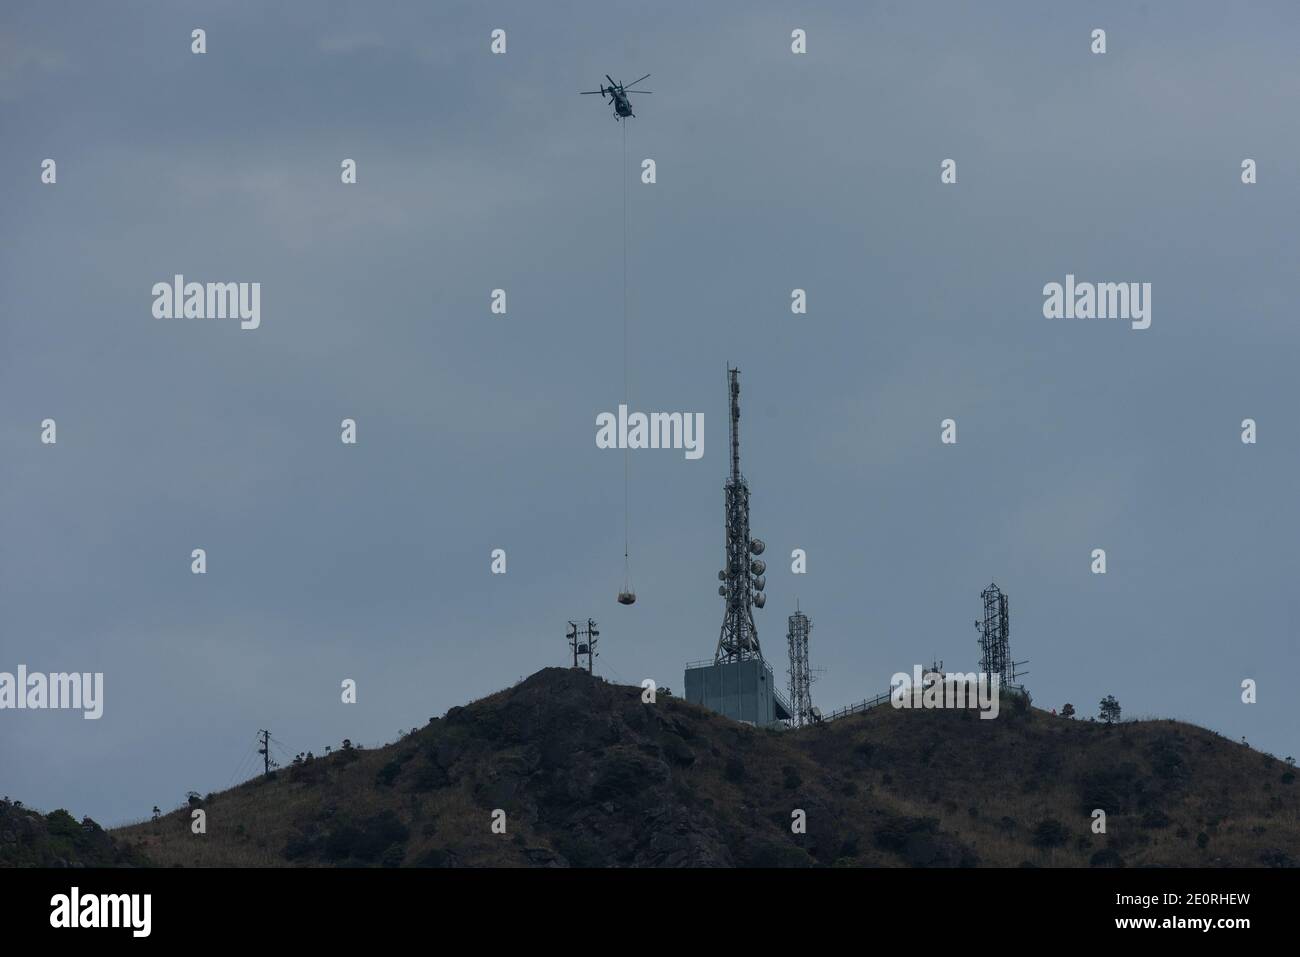 A helicopter drops construction materials on the top of Kowloon Peak, in Hong Kong. Stock Photo